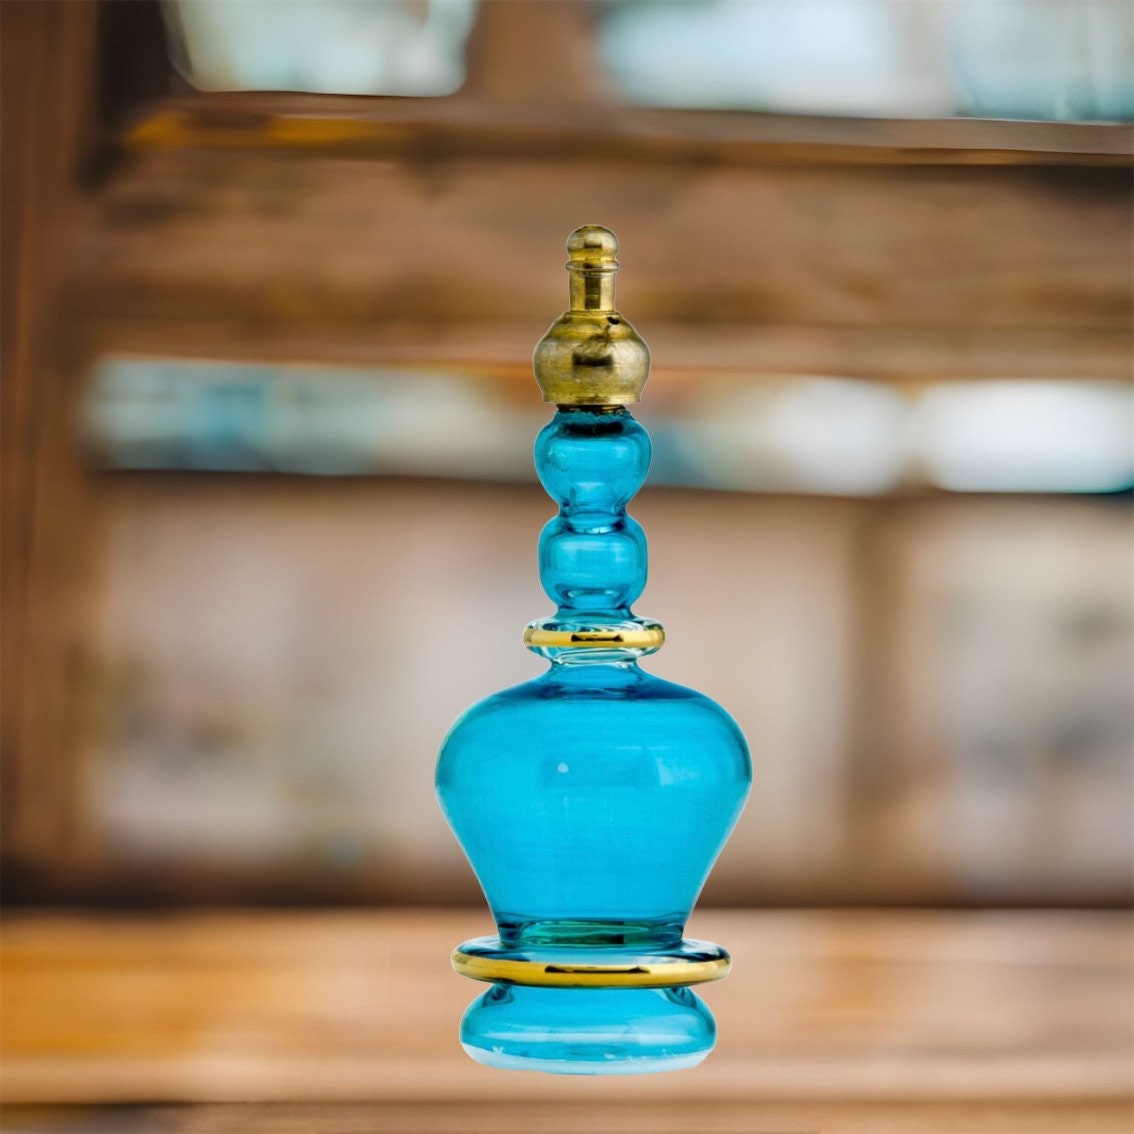 Turquoise Decorative Perfume Bottle with Copper Stopper - Les Trois Pyramides